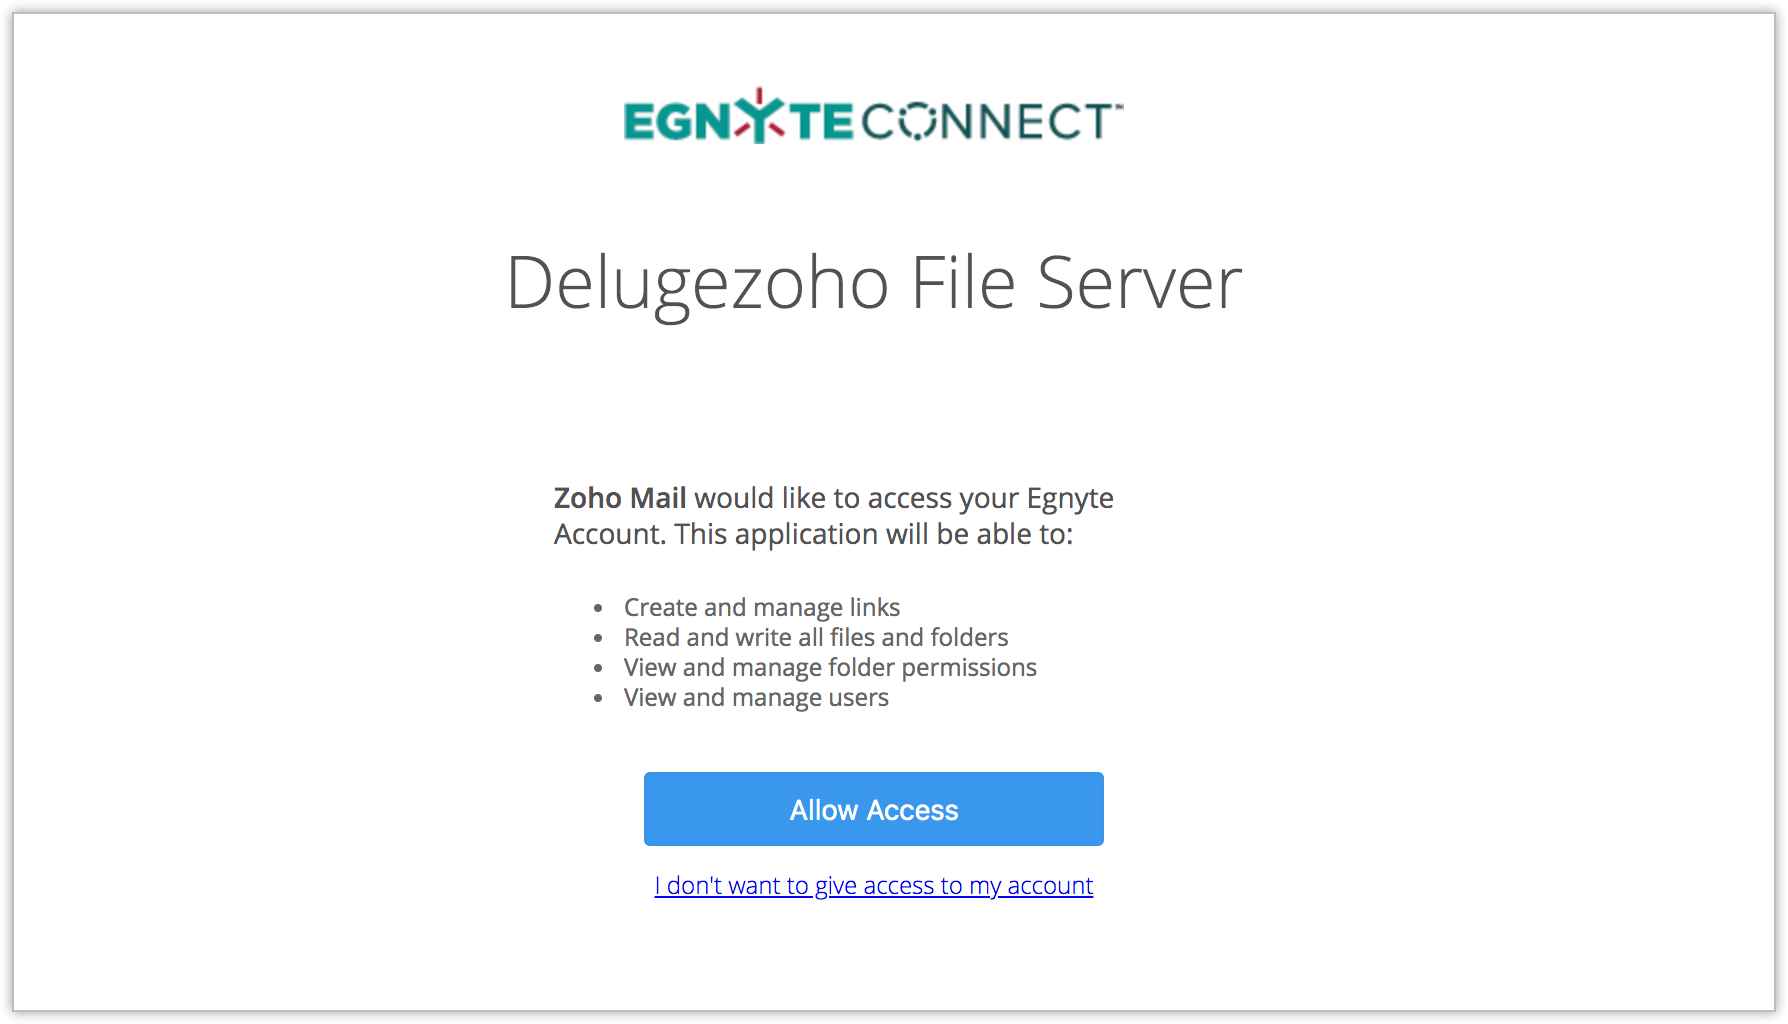 Allowing access for Egnyte account on your Zoho Mail